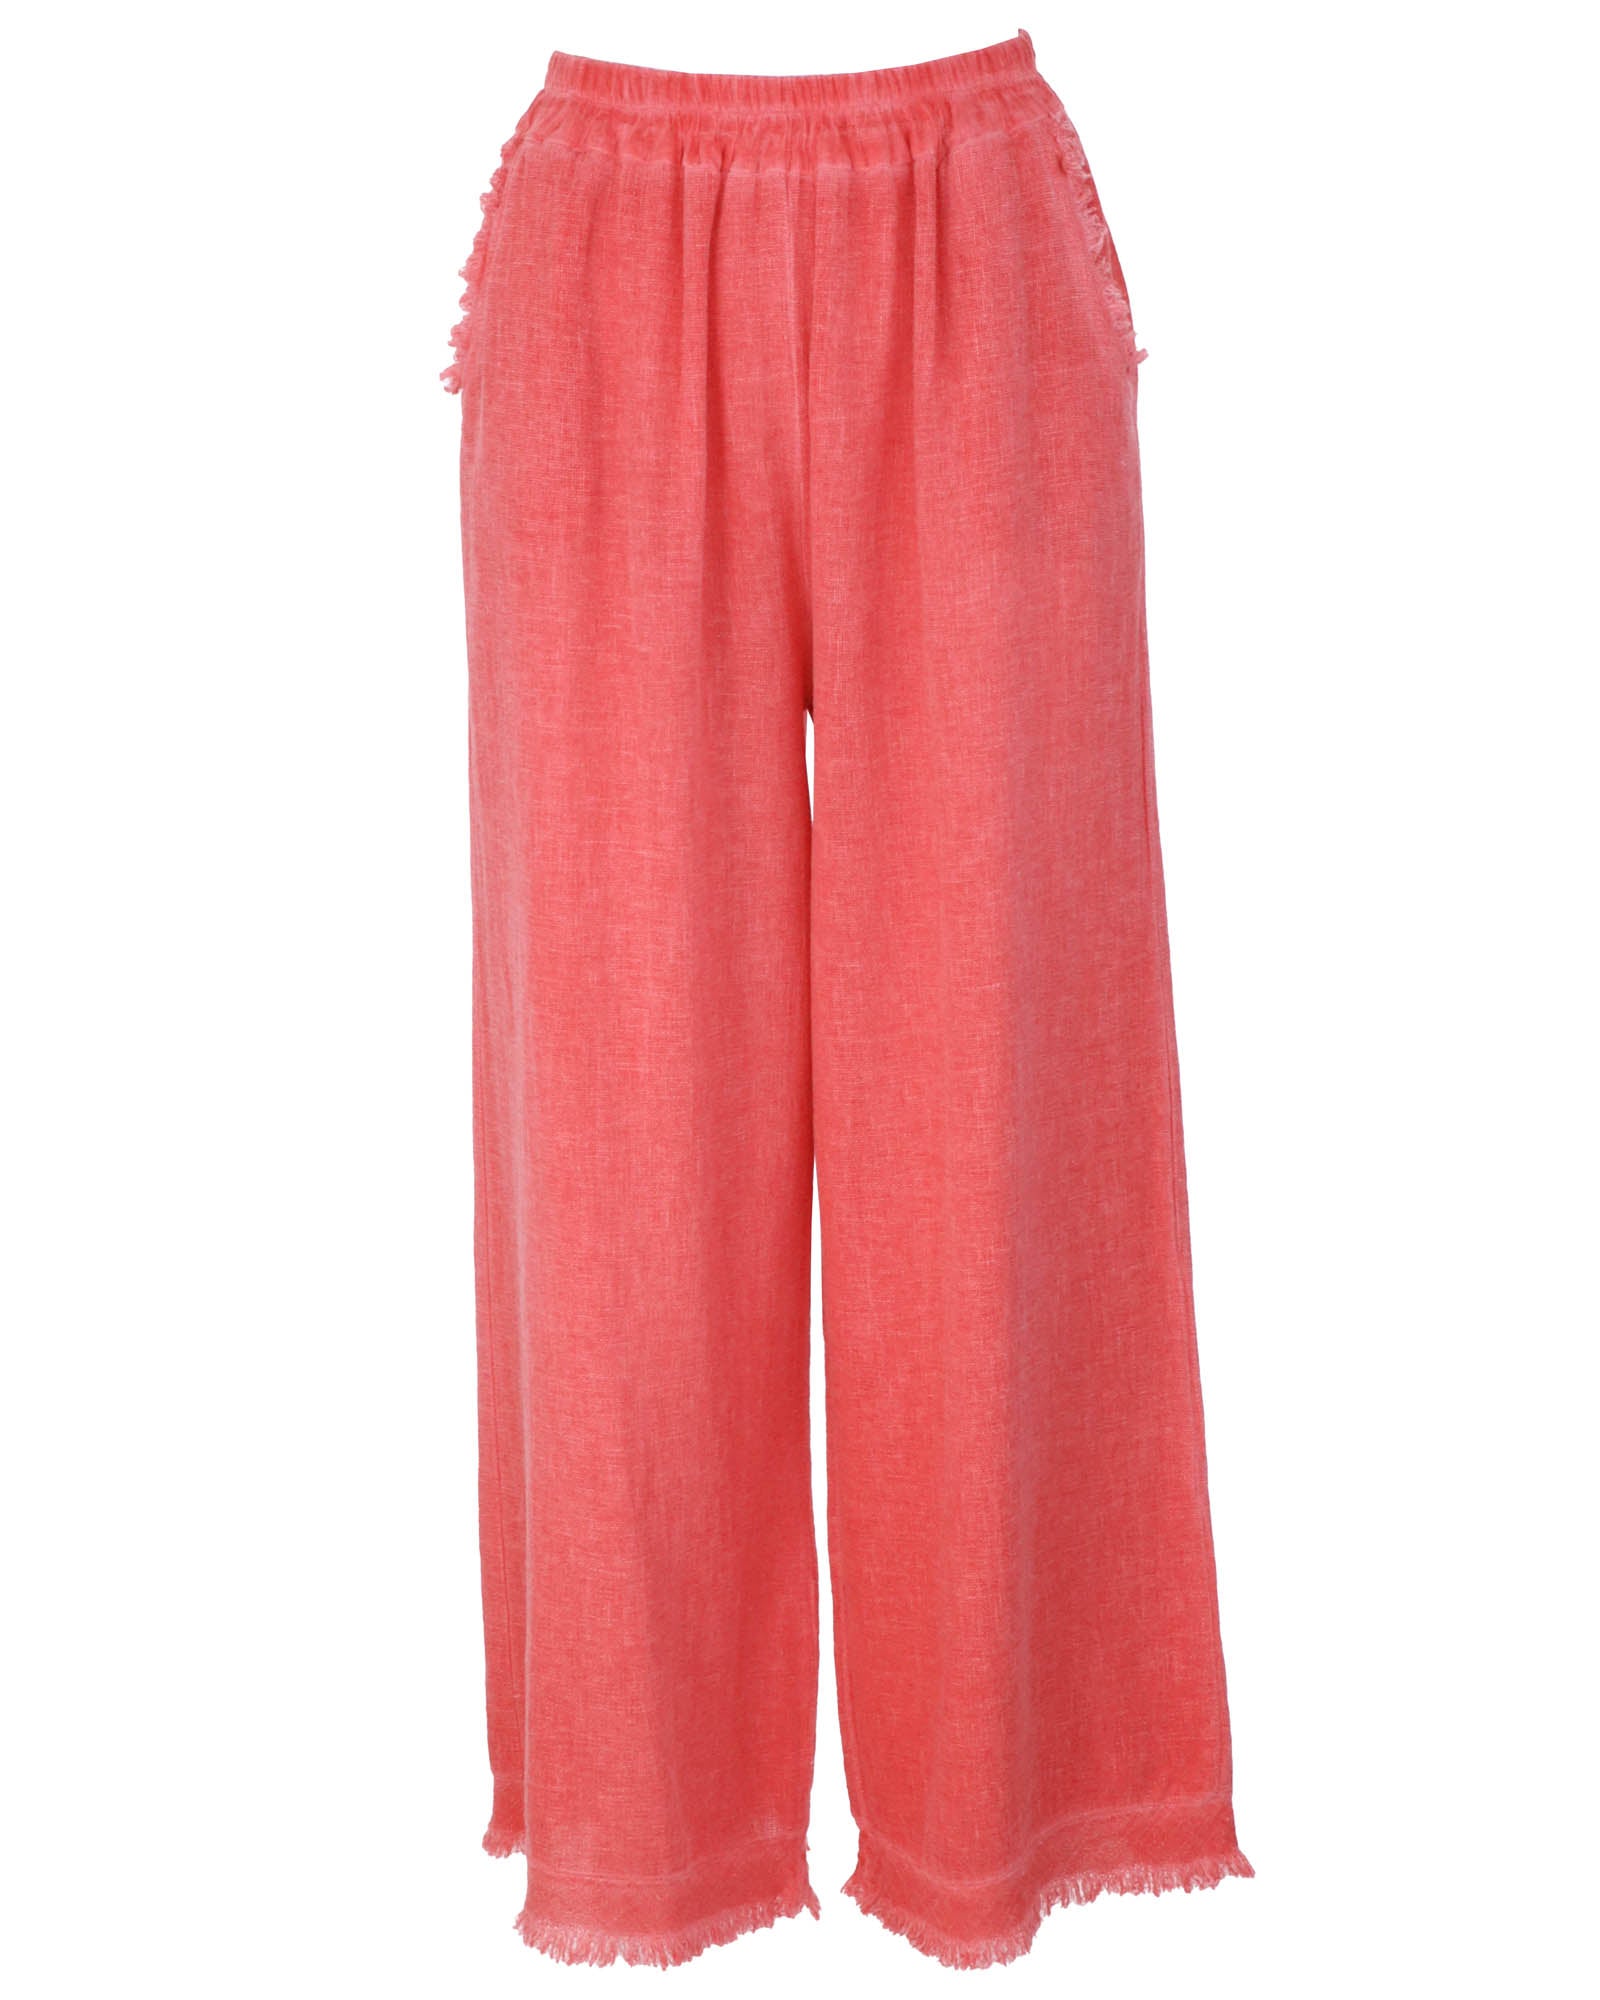 Linen and Cotton Blend Trousers